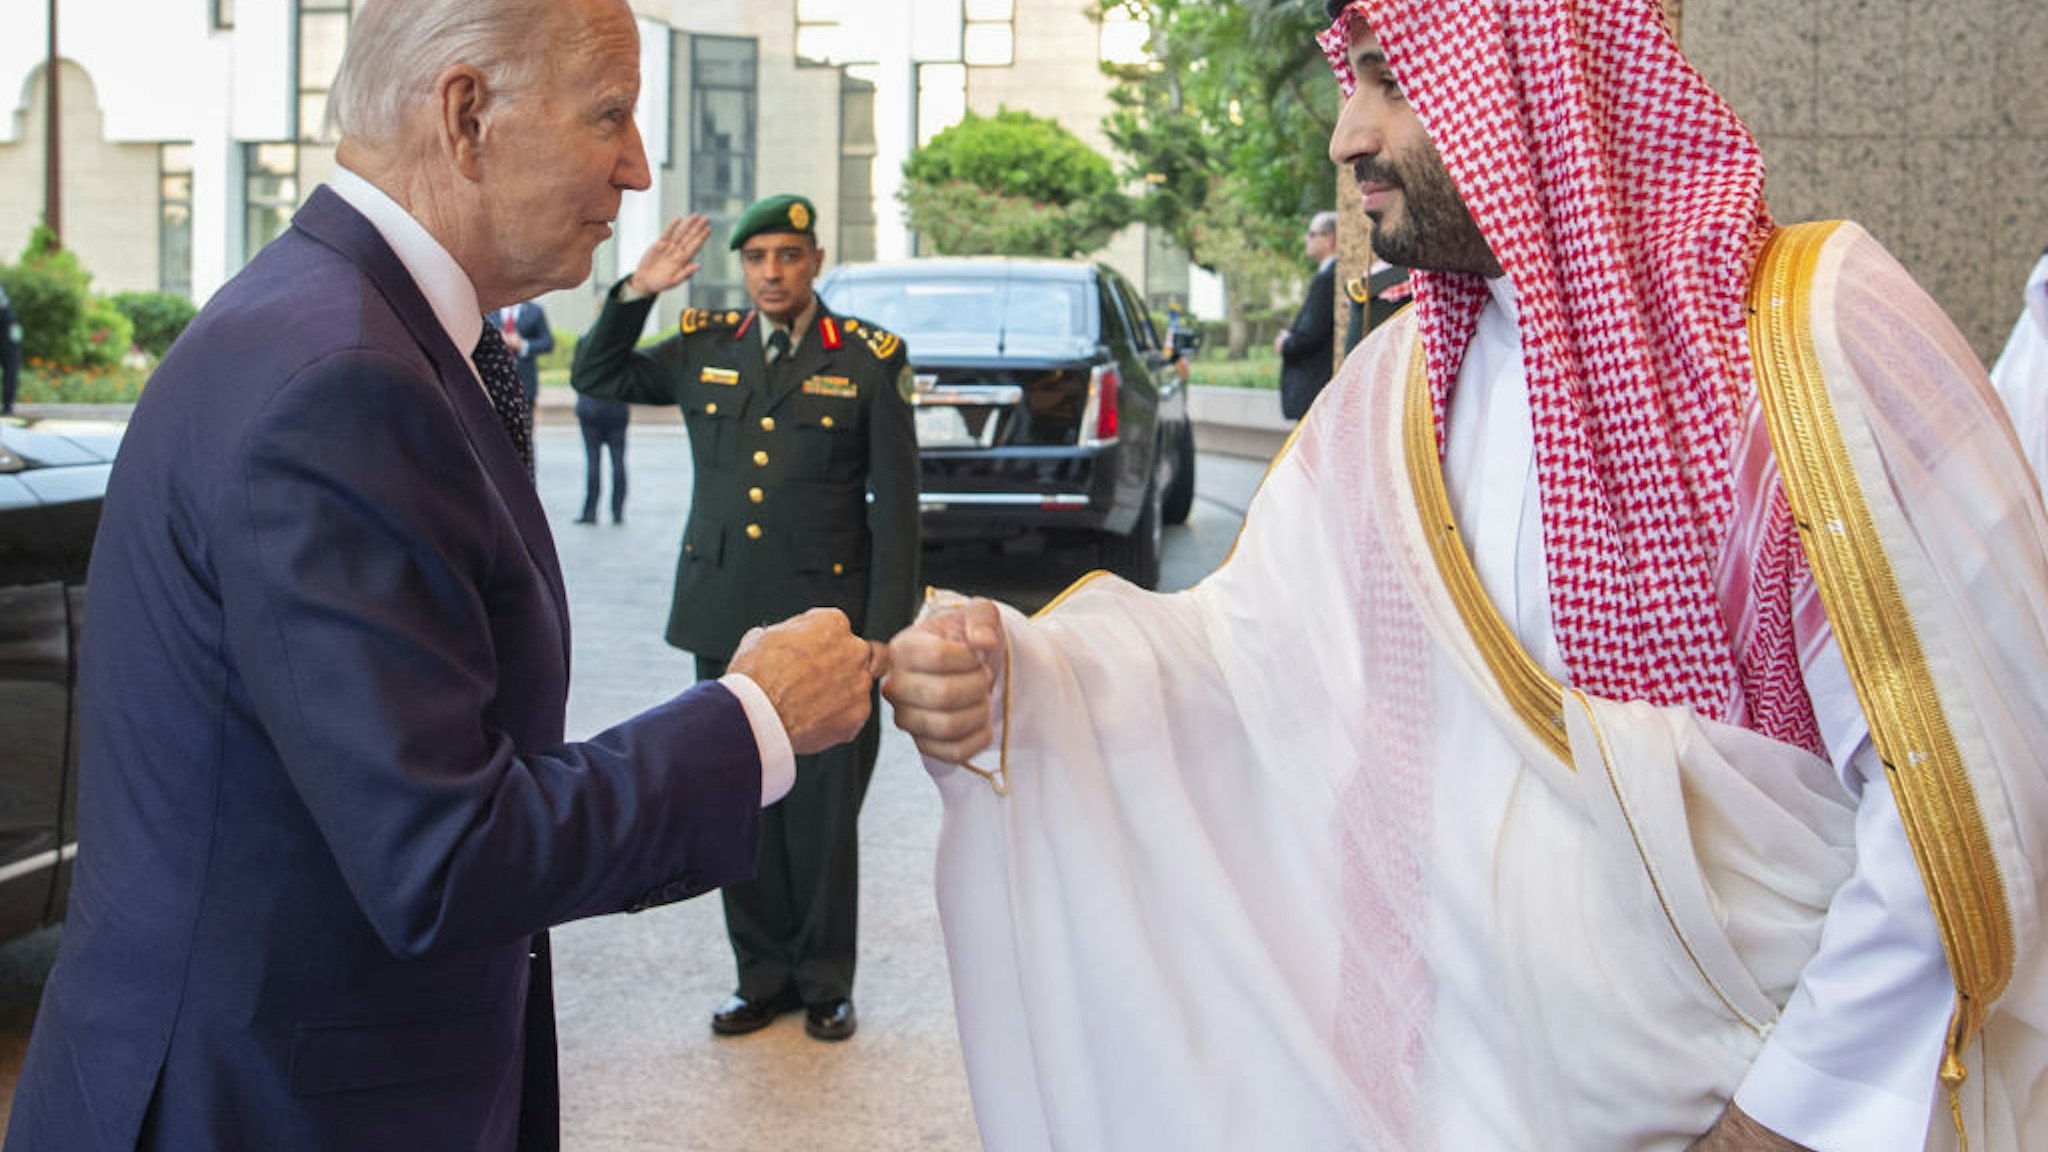 JEDDAH, SAUDI ARABIA - JULY 15: (----EDITORIAL USE ONLY â MANDATORY CREDIT - "ROYAL COURT OF SAUDI ARABIA / HANDOUT" - NO MARKETING NO ADVERTISING CAMPAIGNS - DISTRIBUTED AS A SERVICE TO CLIENTS----) US President Joe Biden (L) being welcomed by Saudi Arabian Crown Prince Mohammed bin Salman (R) at Alsalam Royal Palace in Jeddah, Saudi Arabia on July 15, 2022. (Photo by Royal Court of